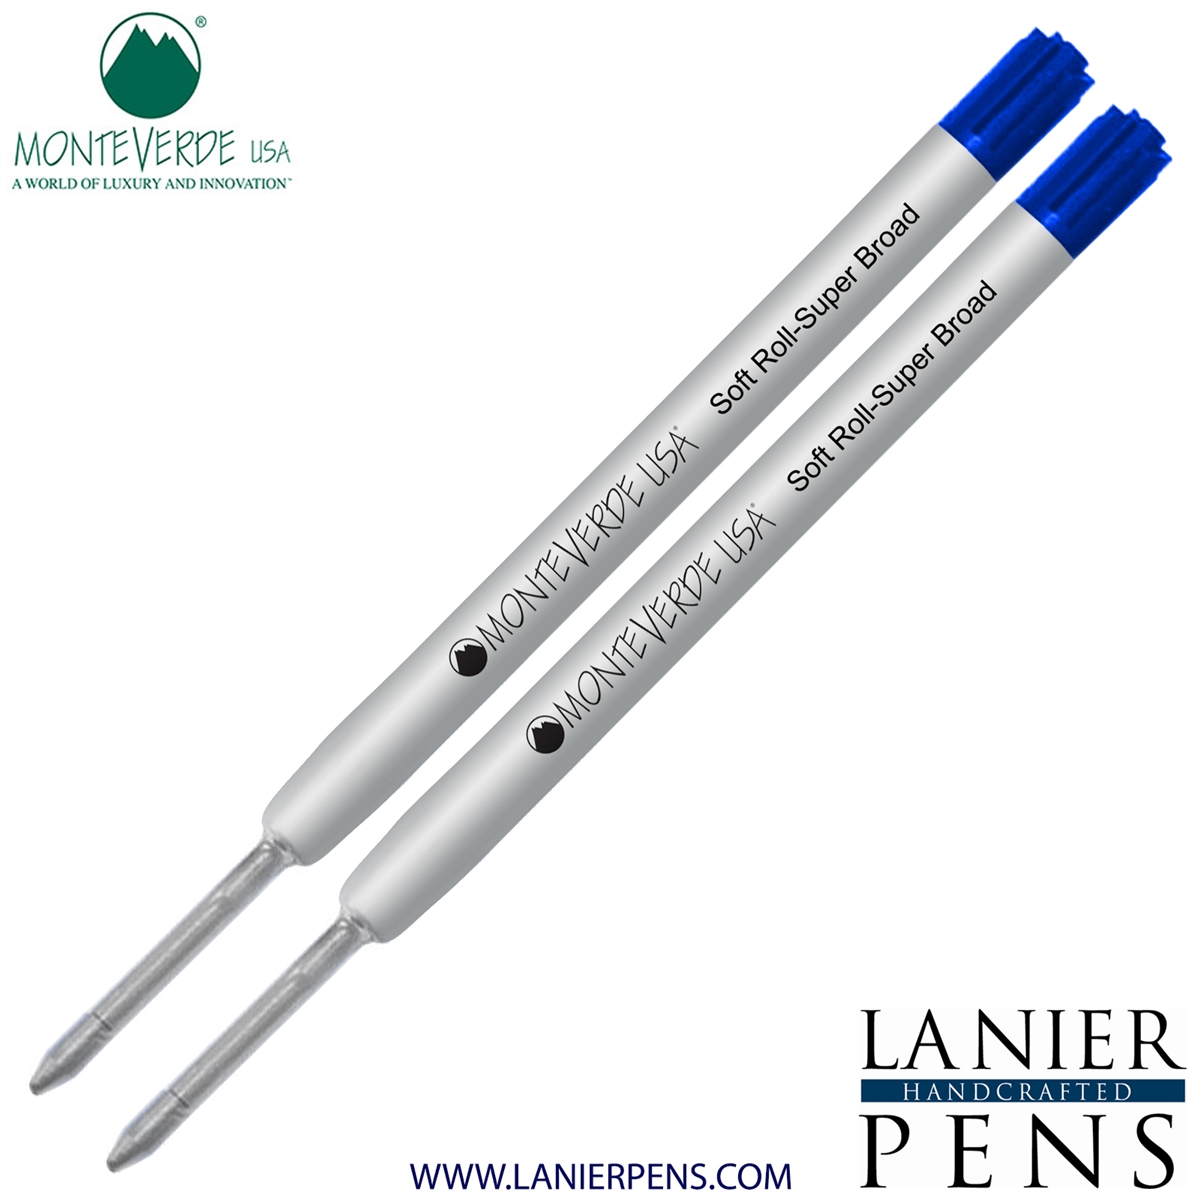 2 Pack - Monteverde Soft Roll Super Broad Ballpoint P15 Paste Ink Refill Compatible with most Parker Style Ballpoint Pens - Blue (Super Broad Tip 1.4mm) - Lanier Pens